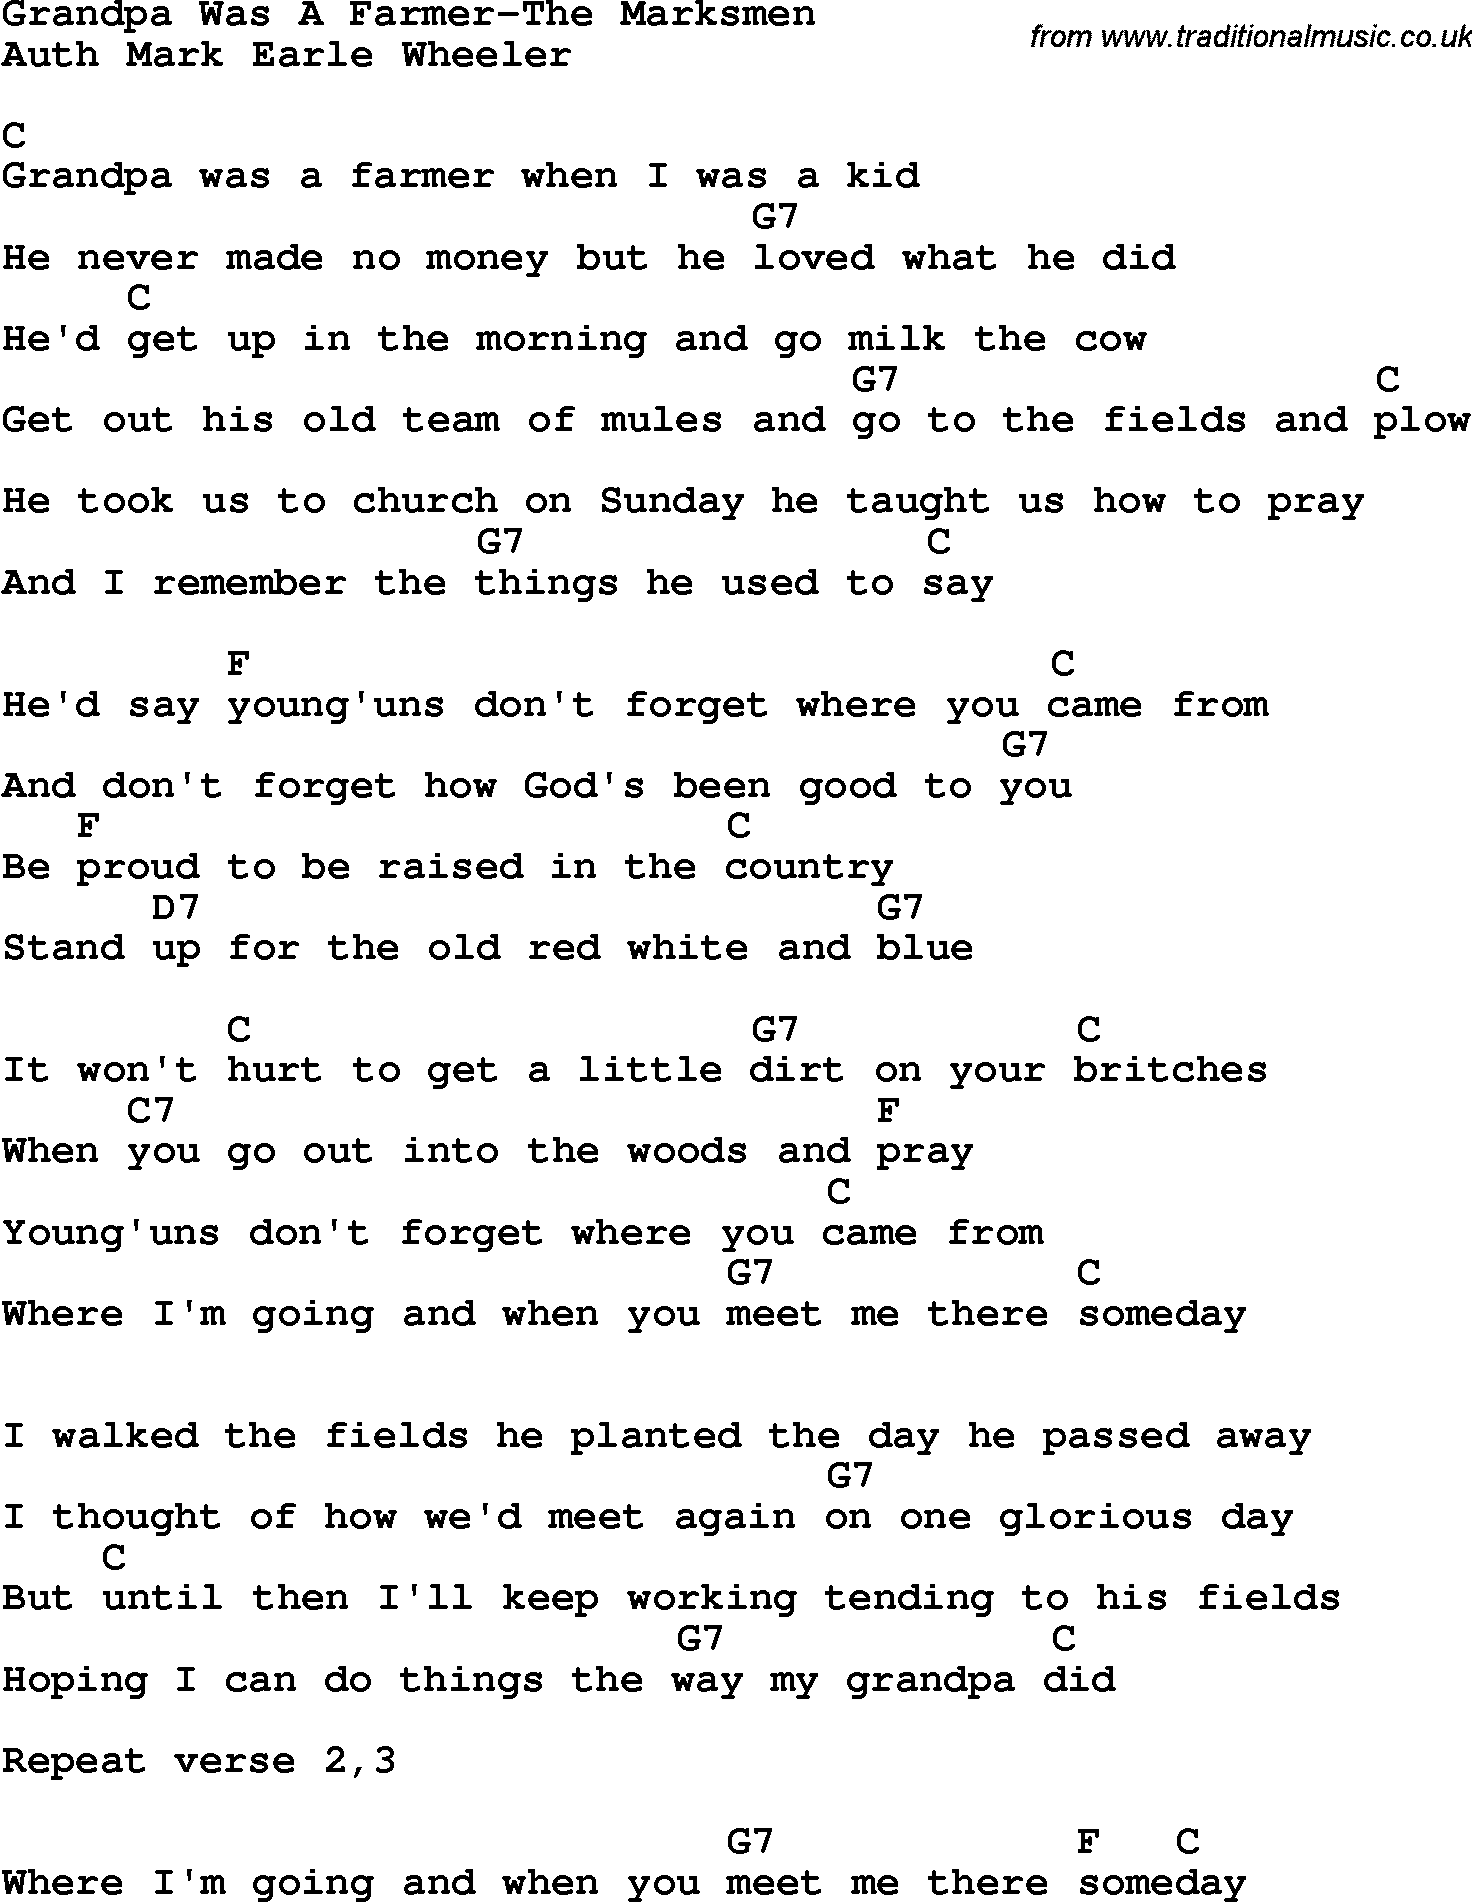 Country, Southern and Bluegrass Gospel Song Grandpa Was A Farmer-The Marksmen lyrics and chords